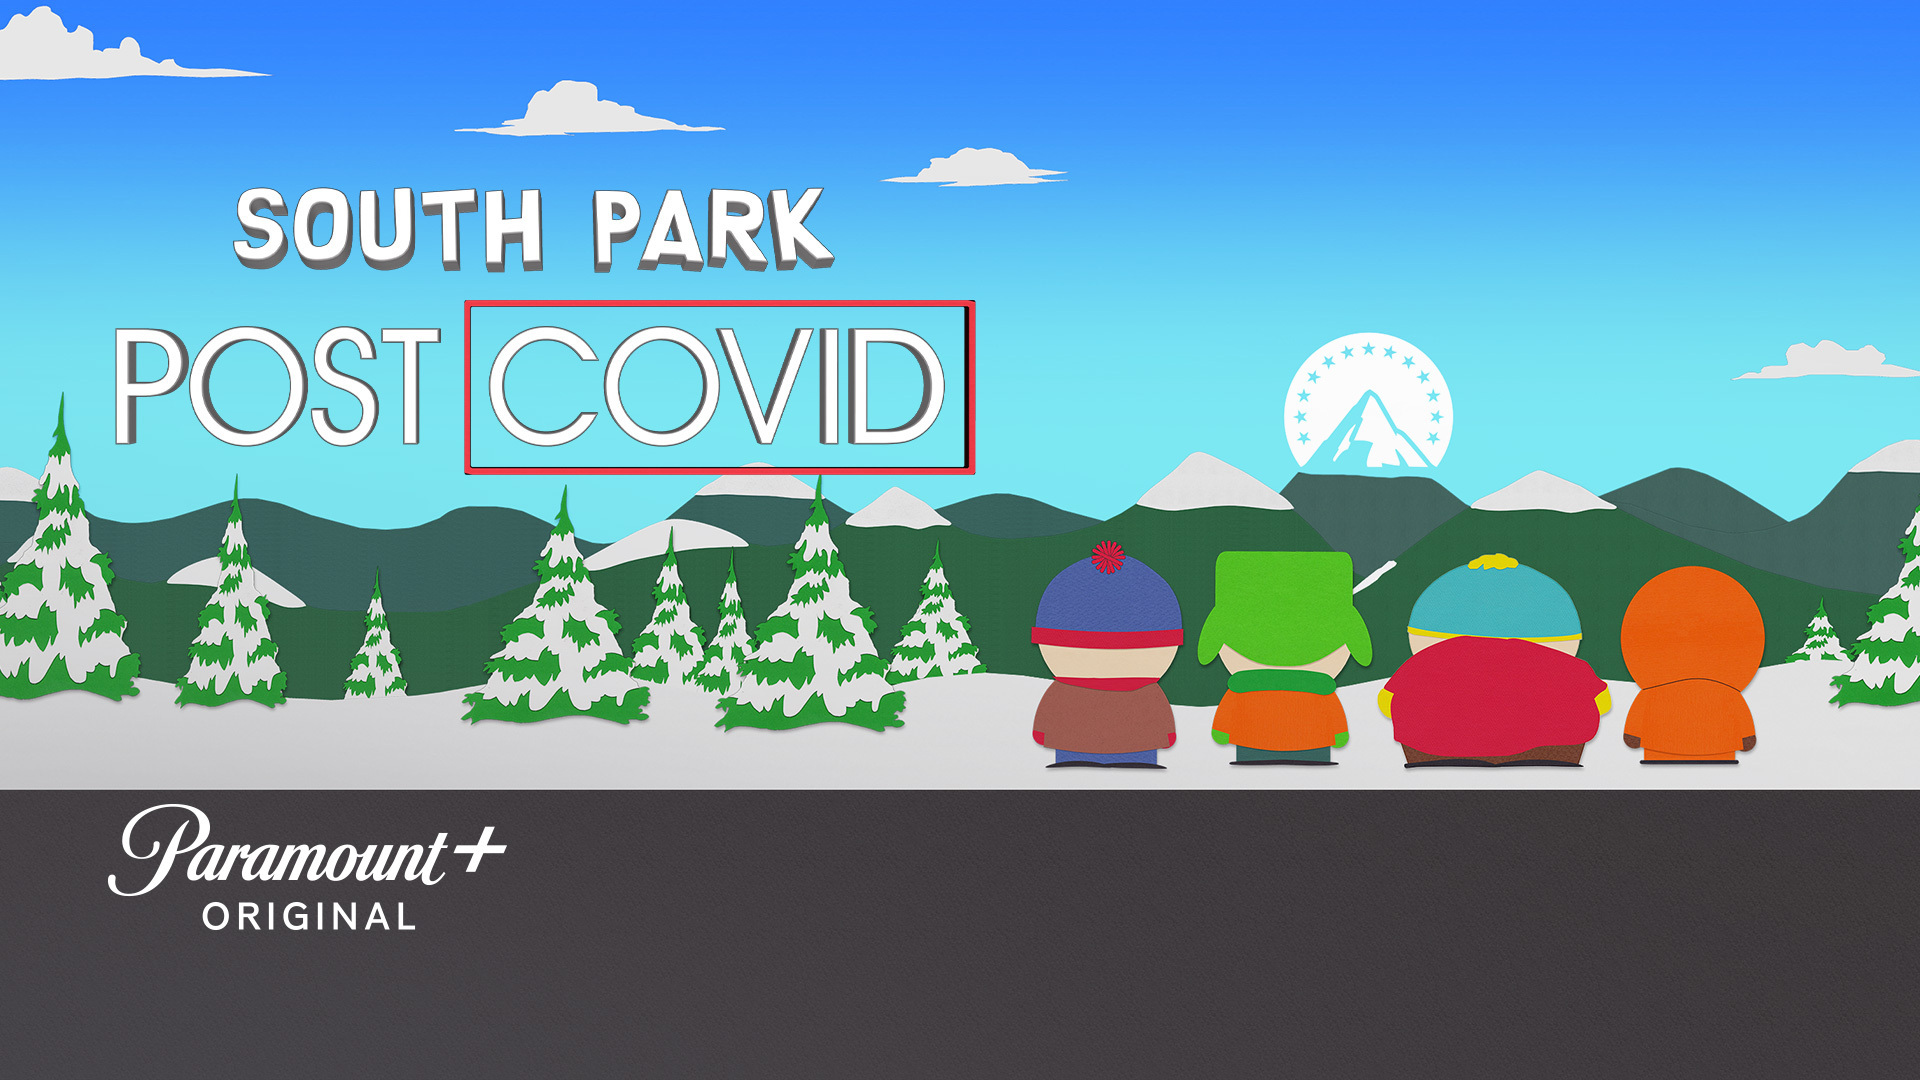 South Park' Exclusive Event to Stream on Paramount+